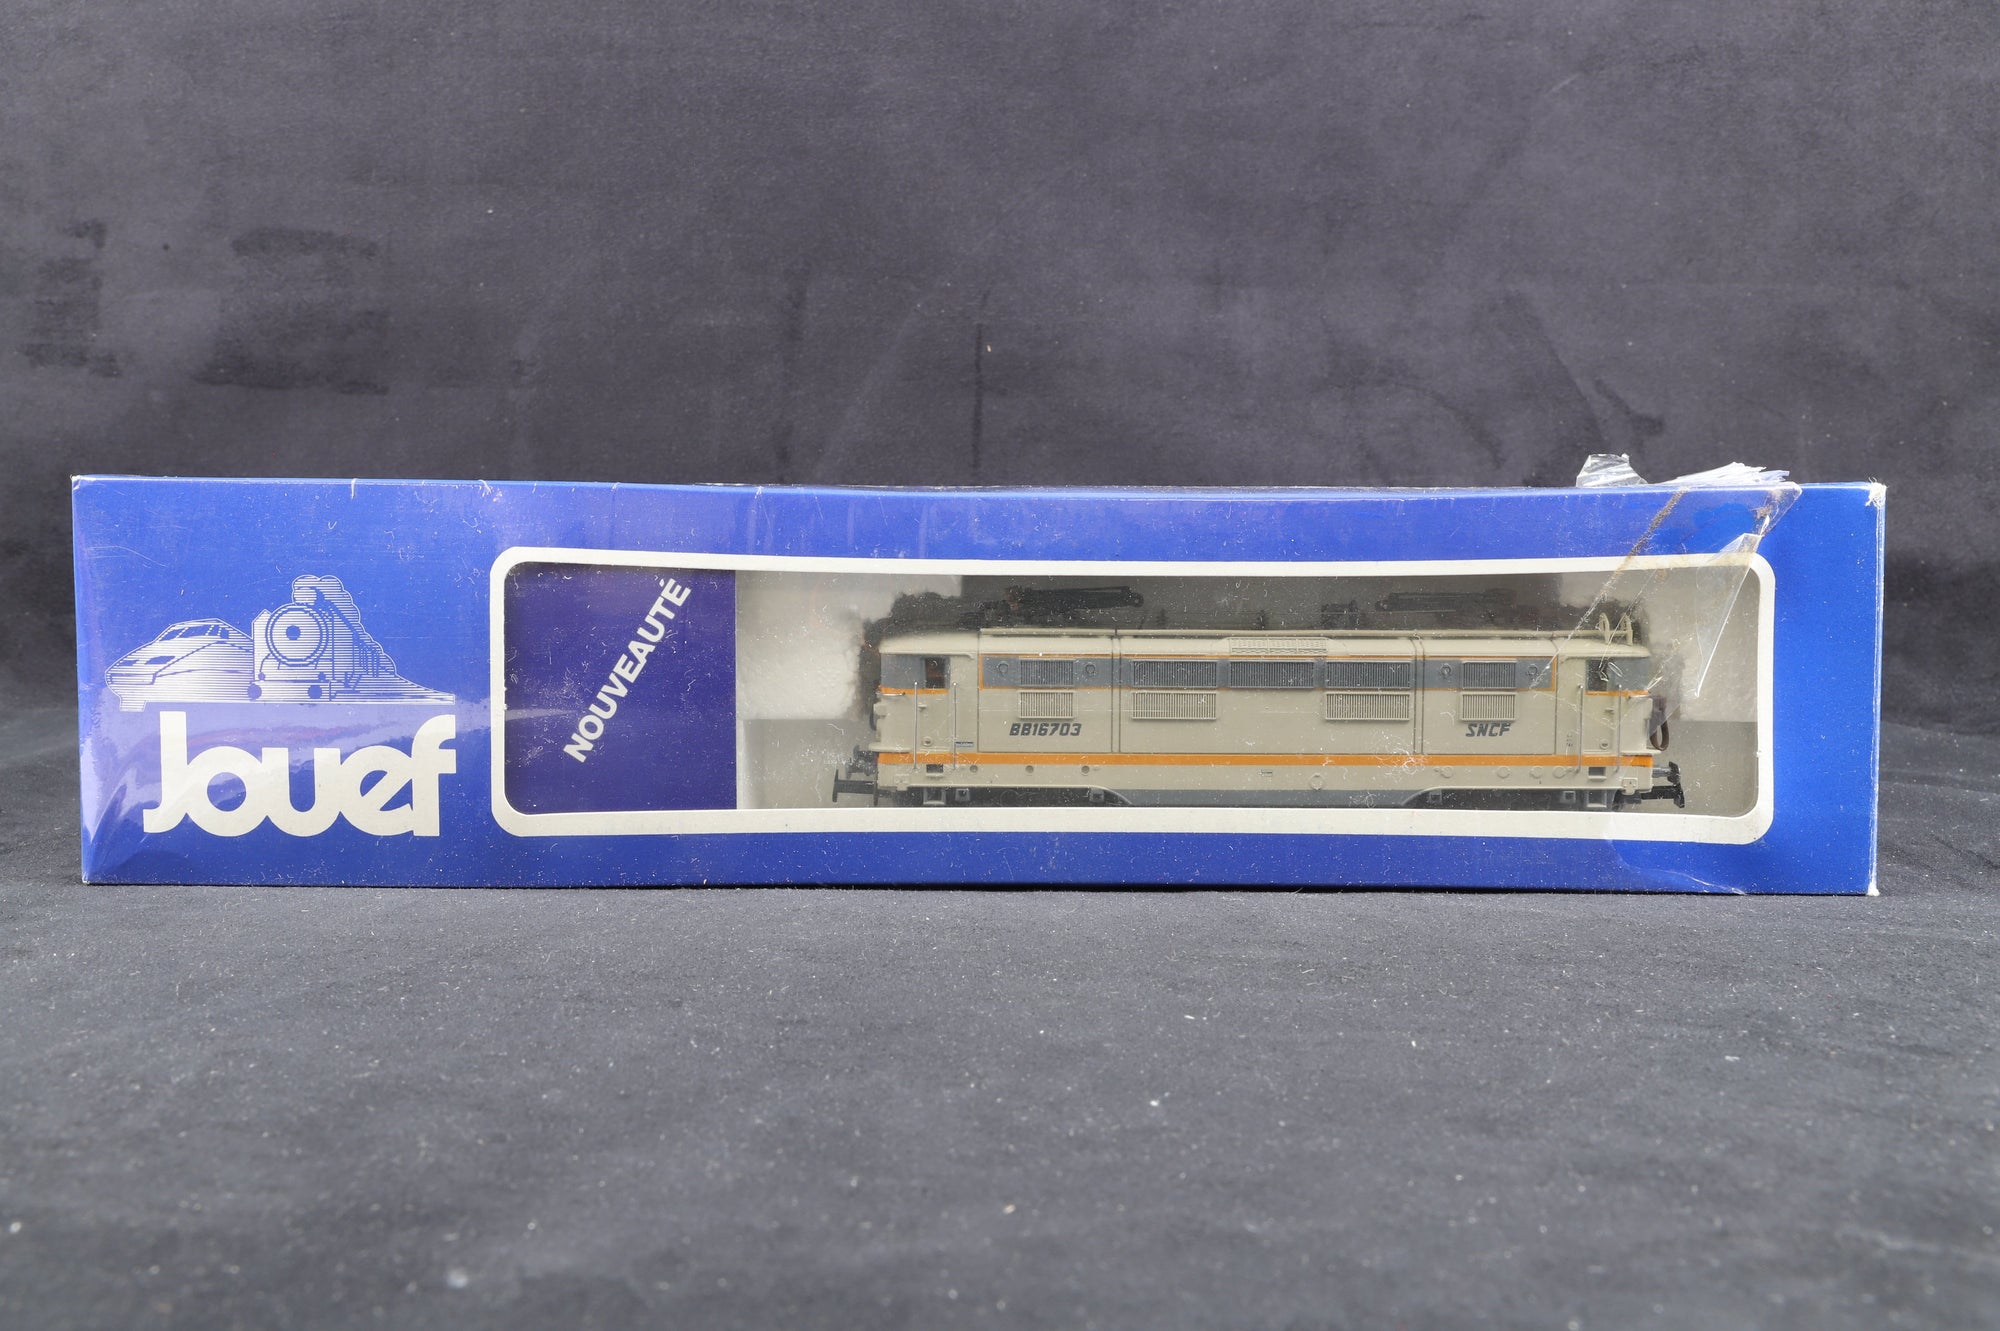 Jouef France HO 1:87 French SNCF TGV HIGH SPEED 4-Piece MULTIPLE UNIT  MIB`78 TOP